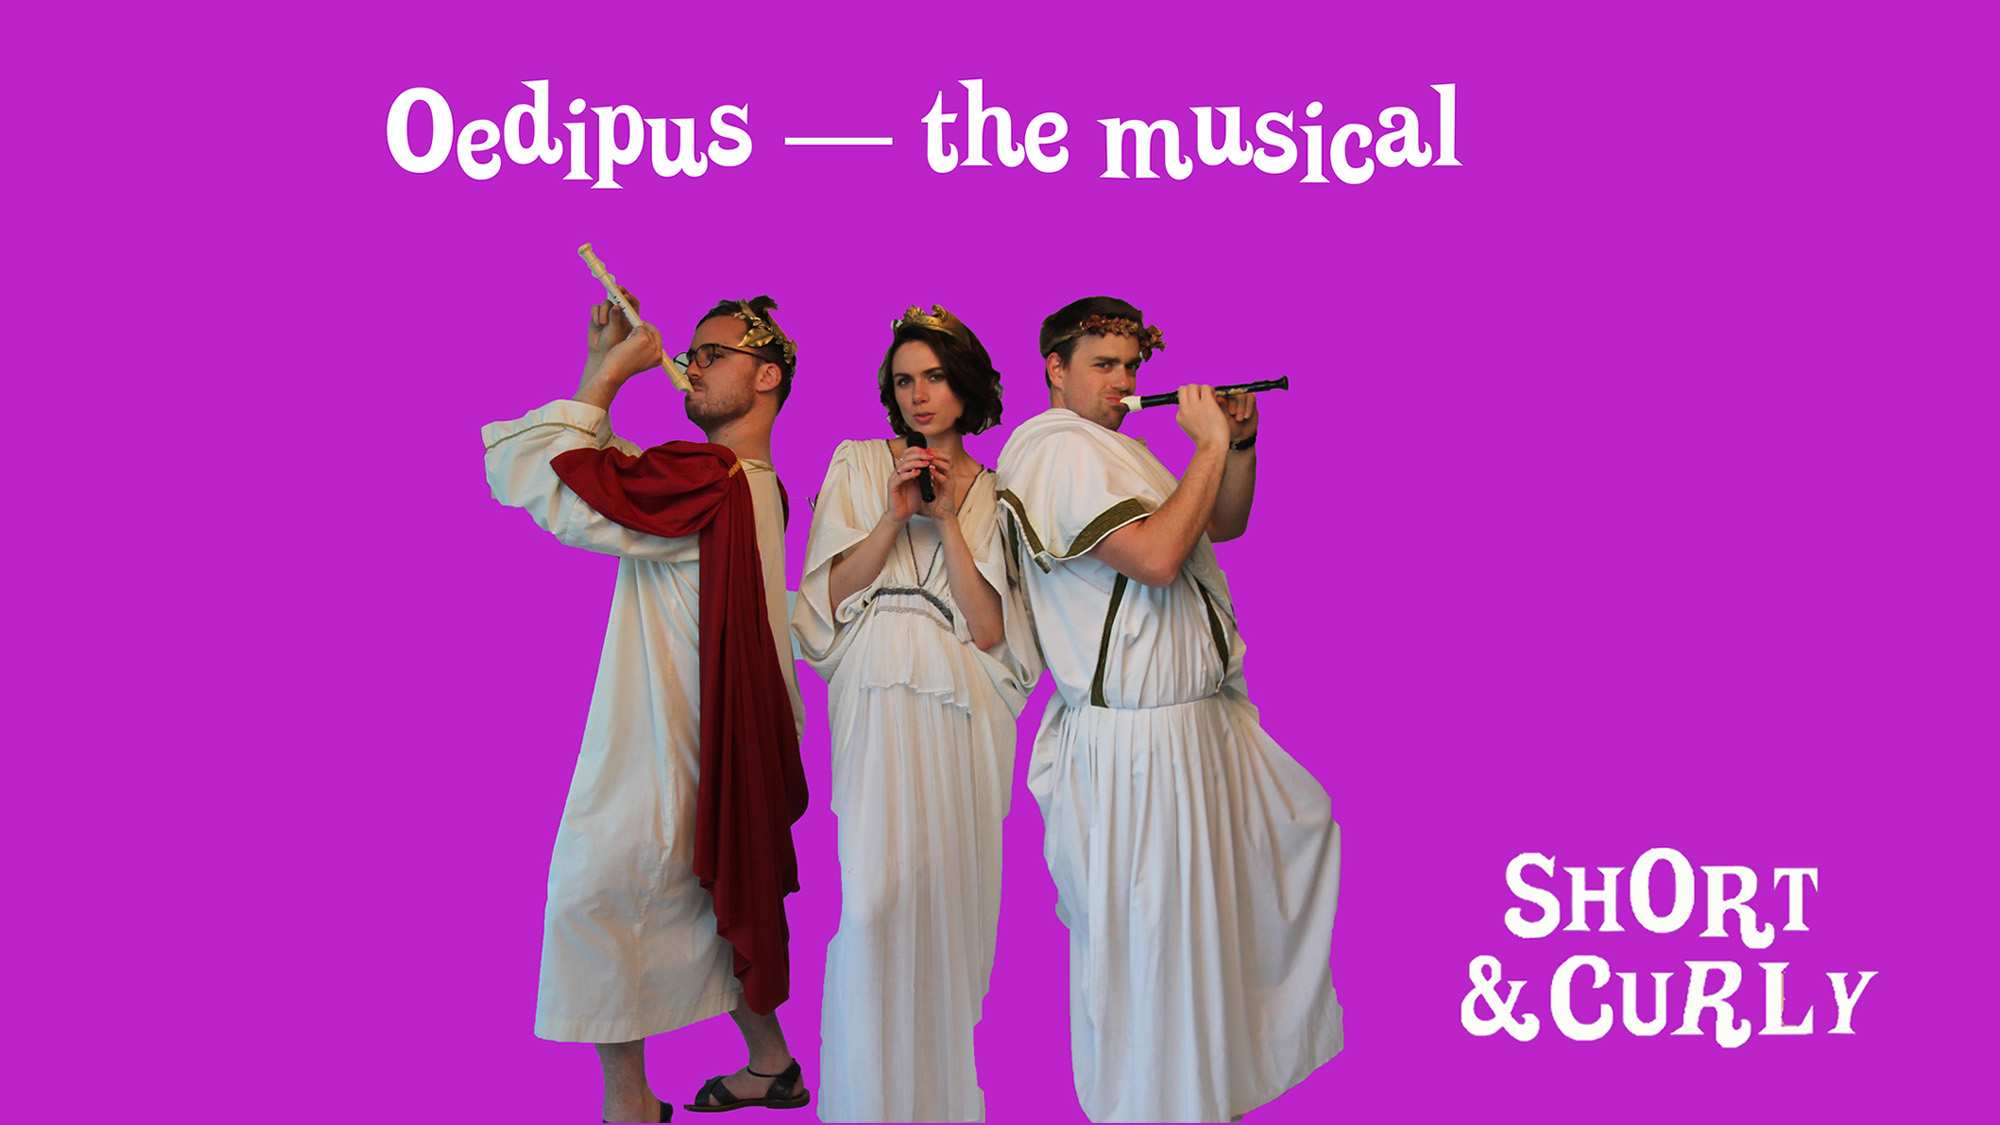 Carl's pick: Oedipus – The Musical